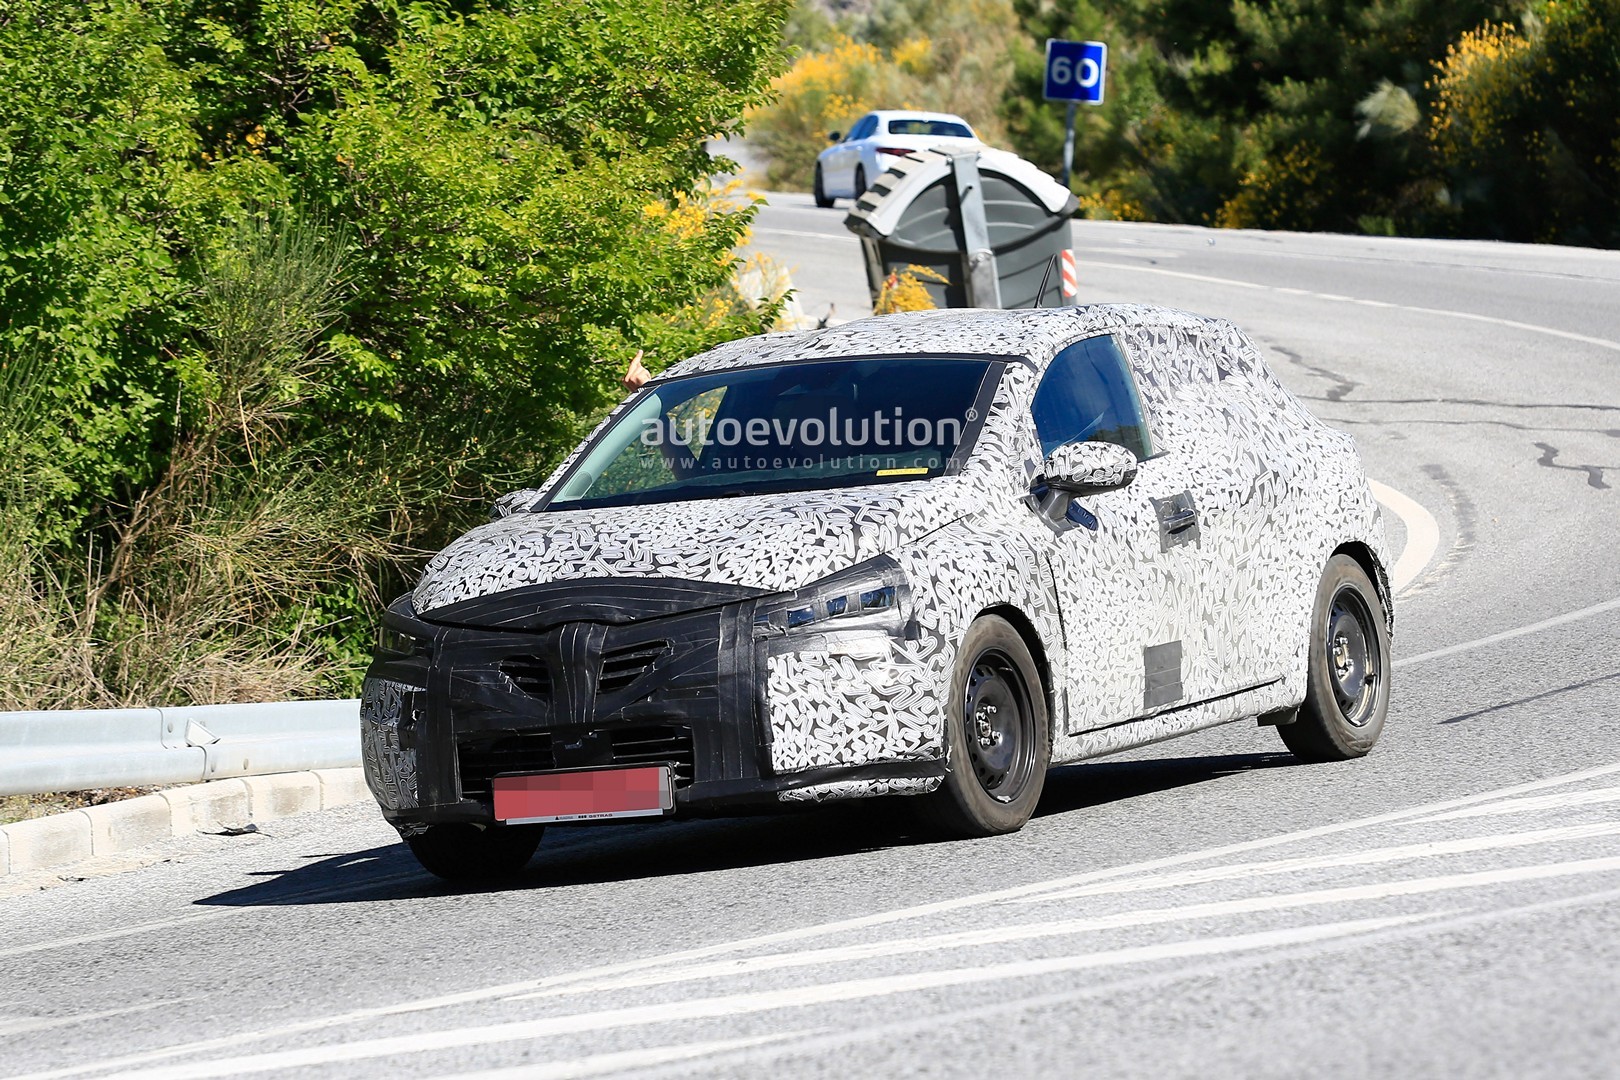 Renault Clio Hybrid, Captur and Megane PHEV Coming in 2020 ...